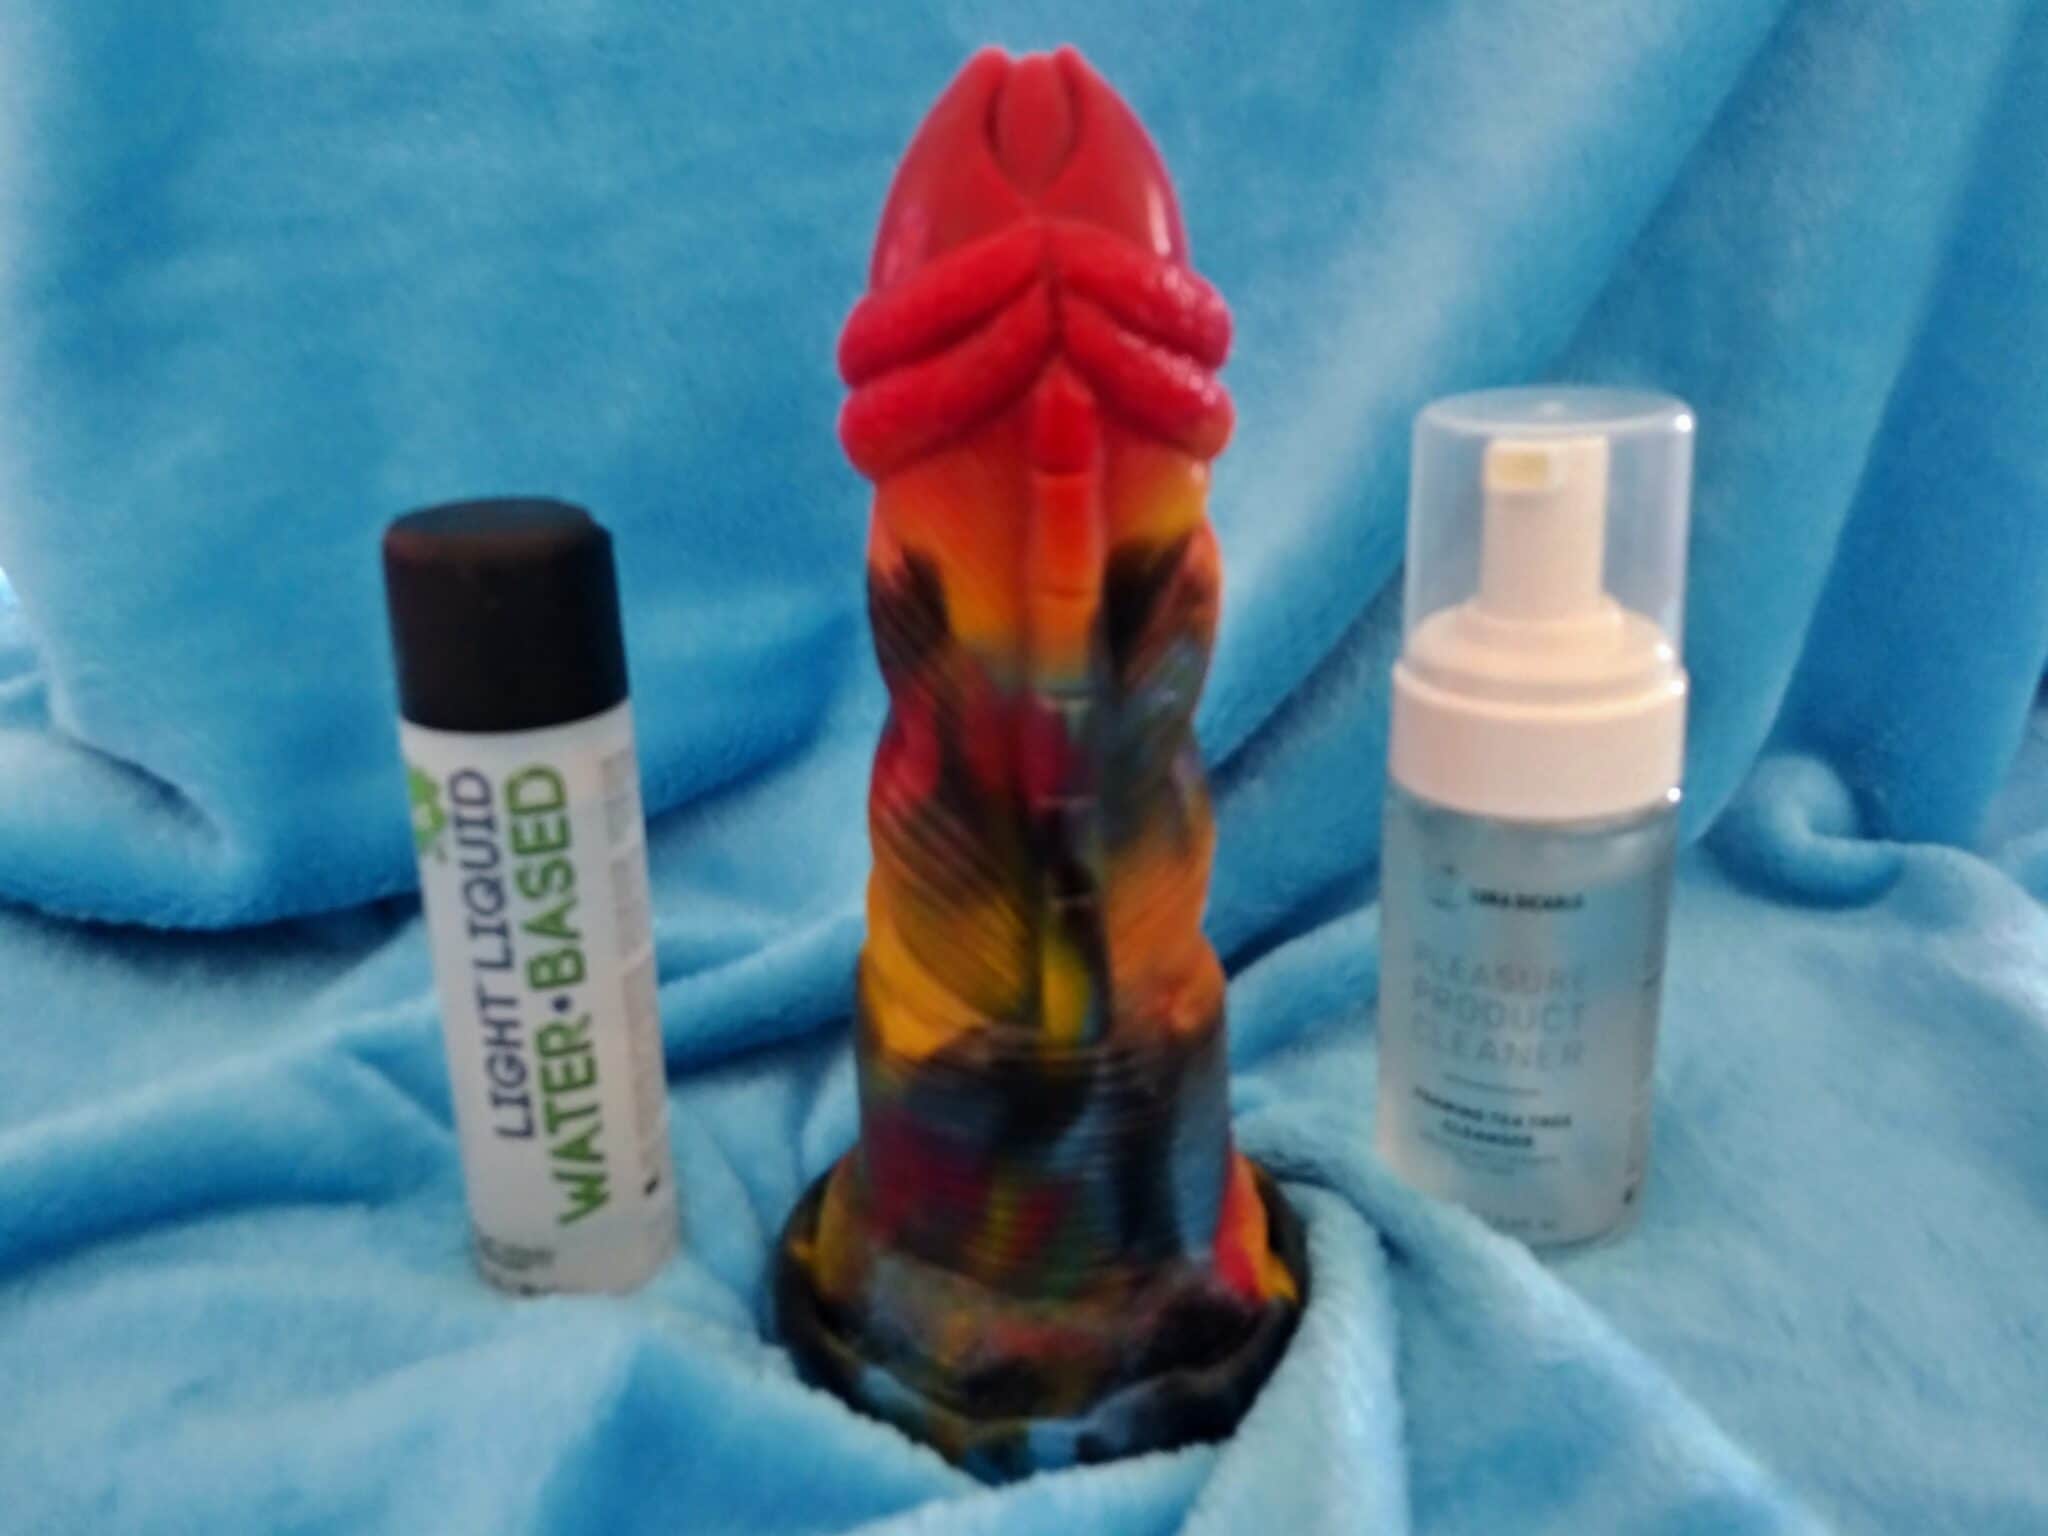 Bigshocked Alien I Graffiti Dildo Reviewing the Material Choices and Care Guidelines